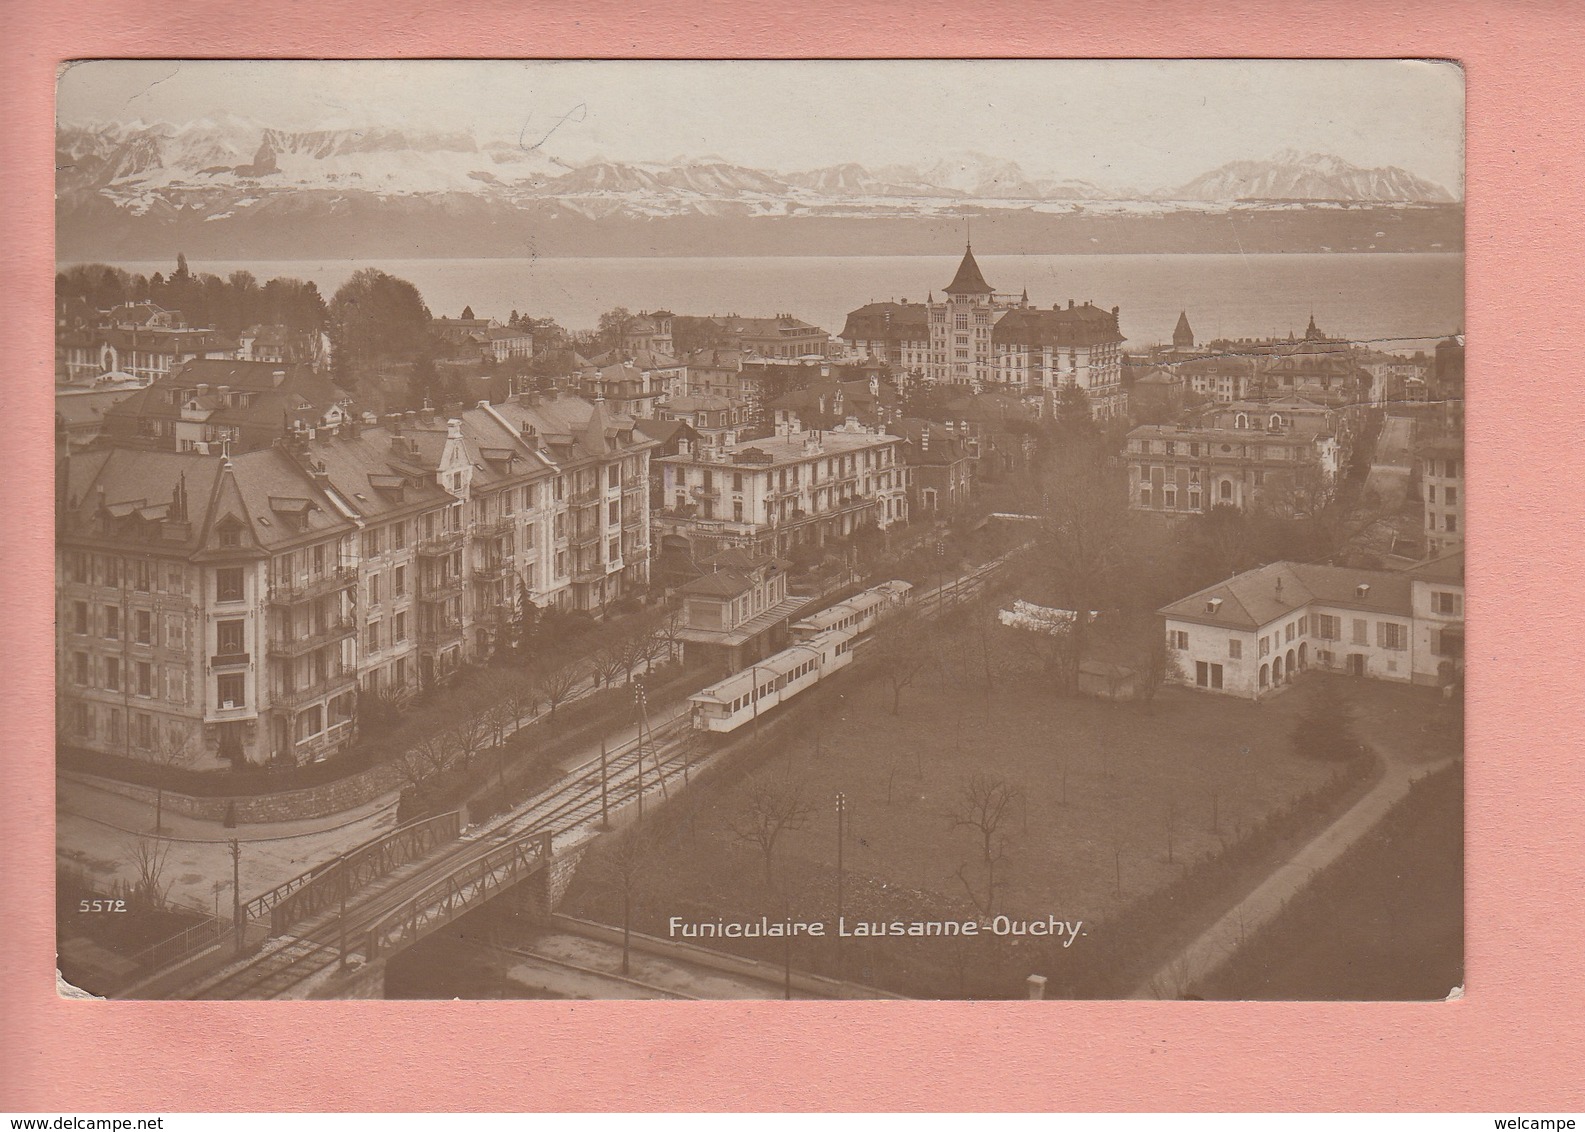 OUDE POSTKAART ZWITSERLAND - SCHWEIZ - SUISSE -  FUNICULAIRE LAUSANNE - OUCHY - Lausanne